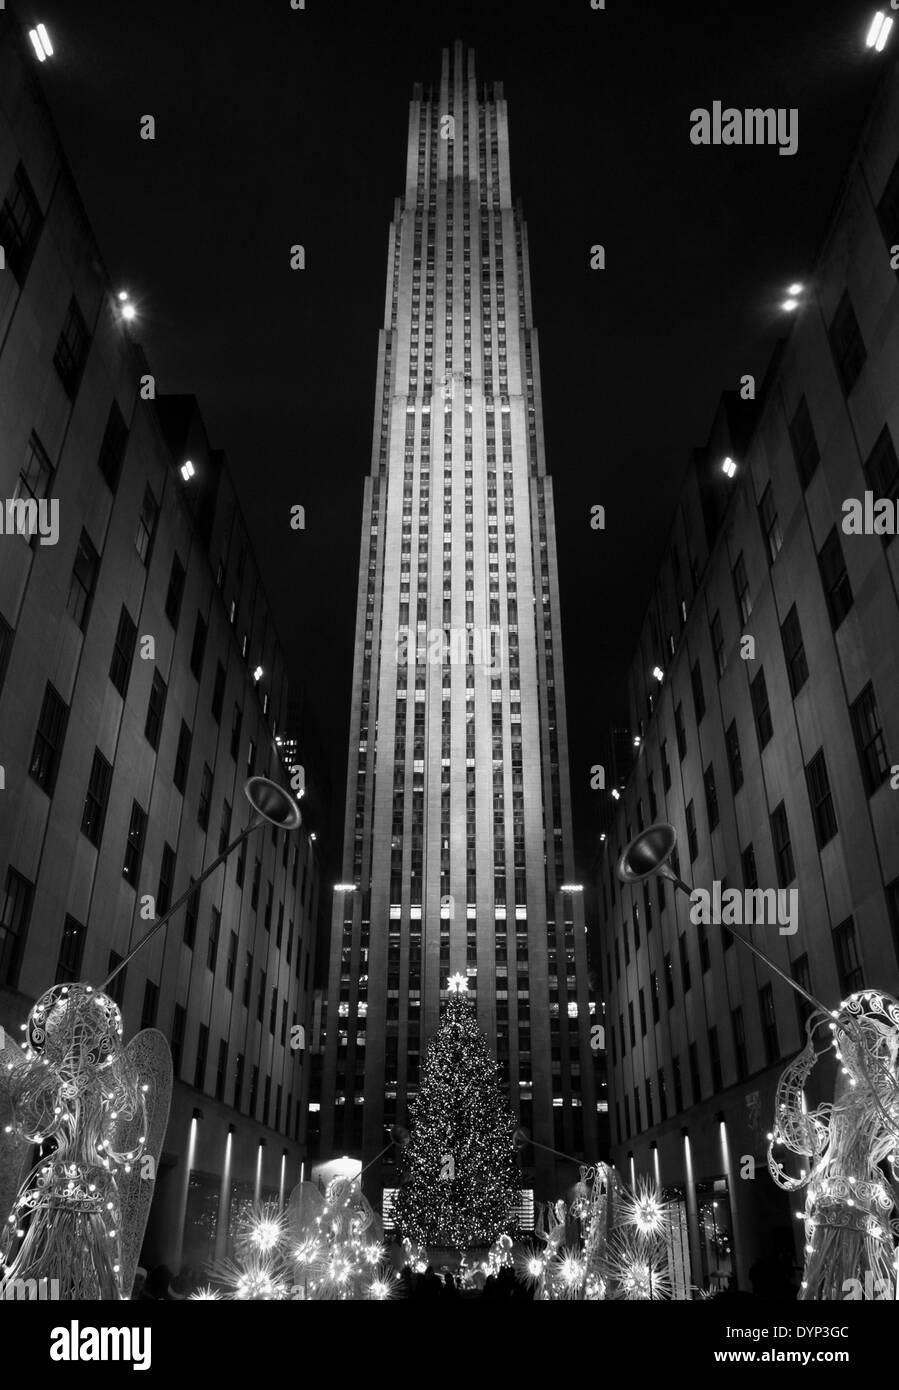 Le Rockefeller Building at night new york city Banque D'Images